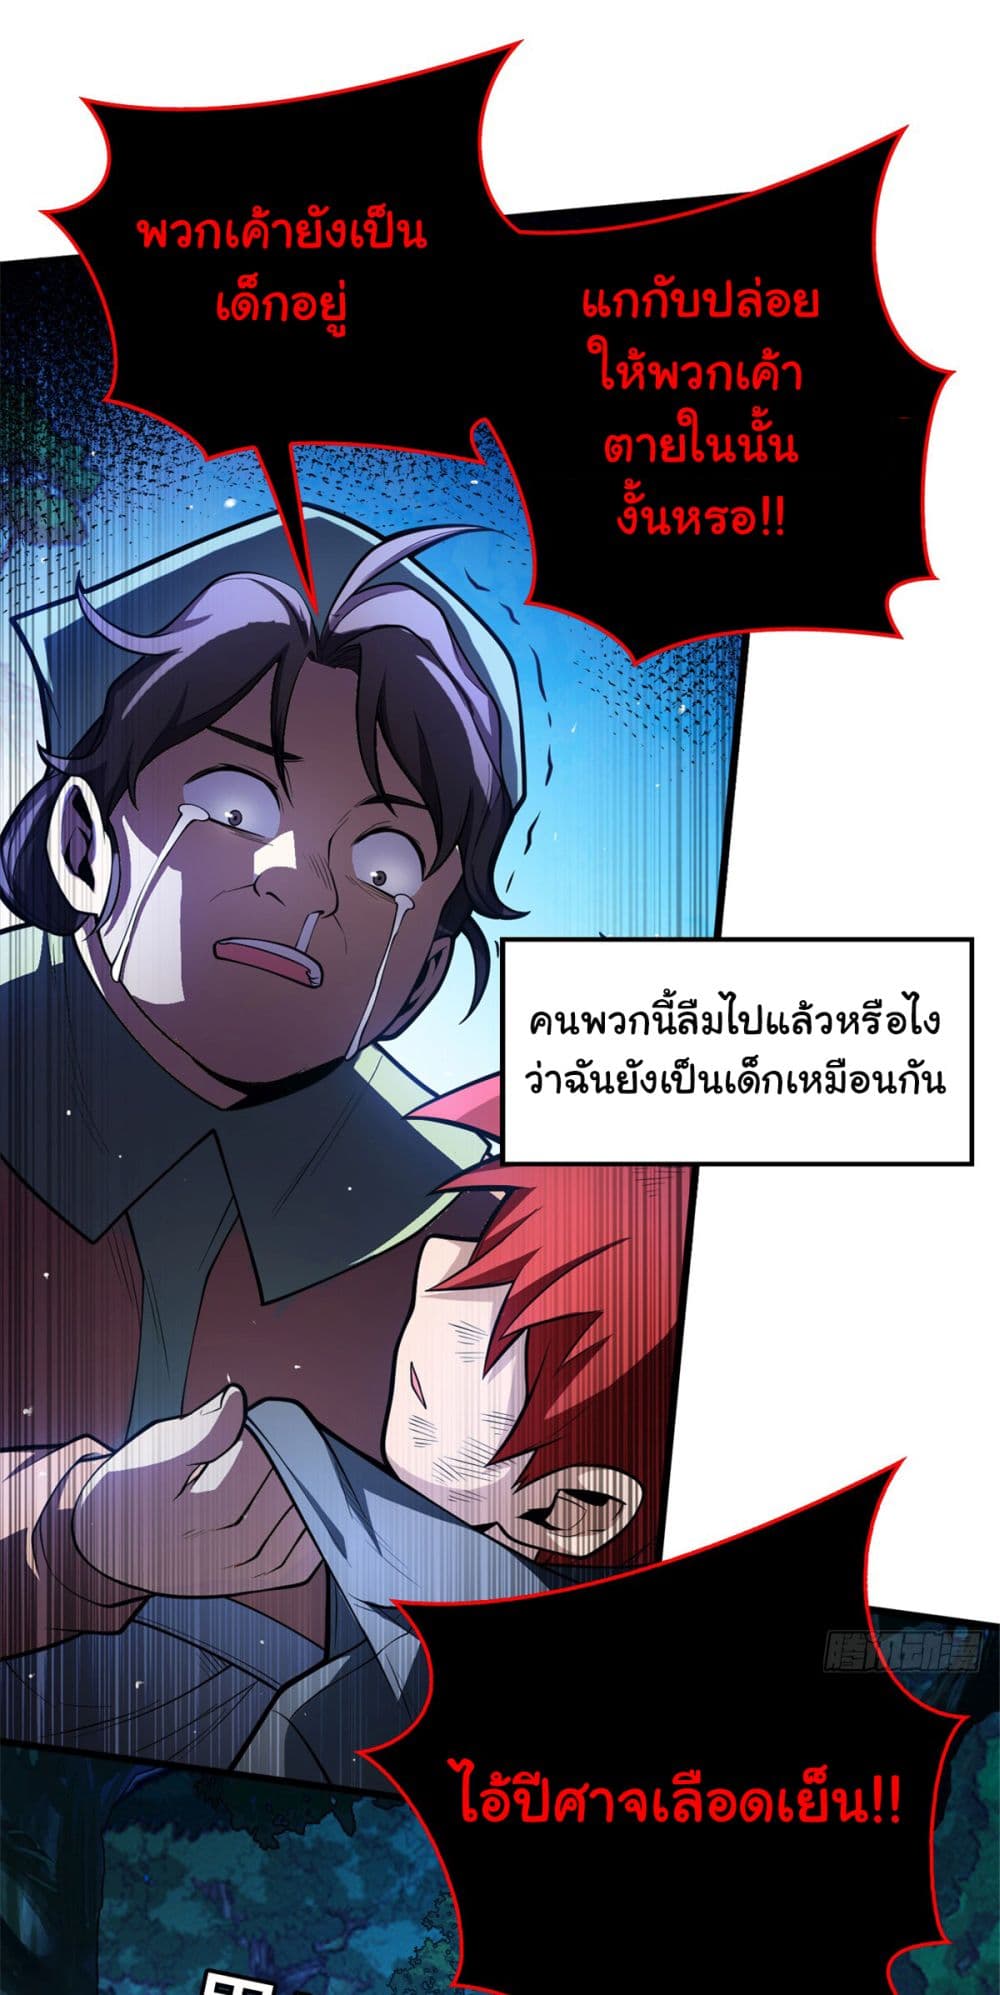 Evil Dragon Is Reincarnated! Revenge Begins at the Age of Five! ตอนที่ 8 (28)